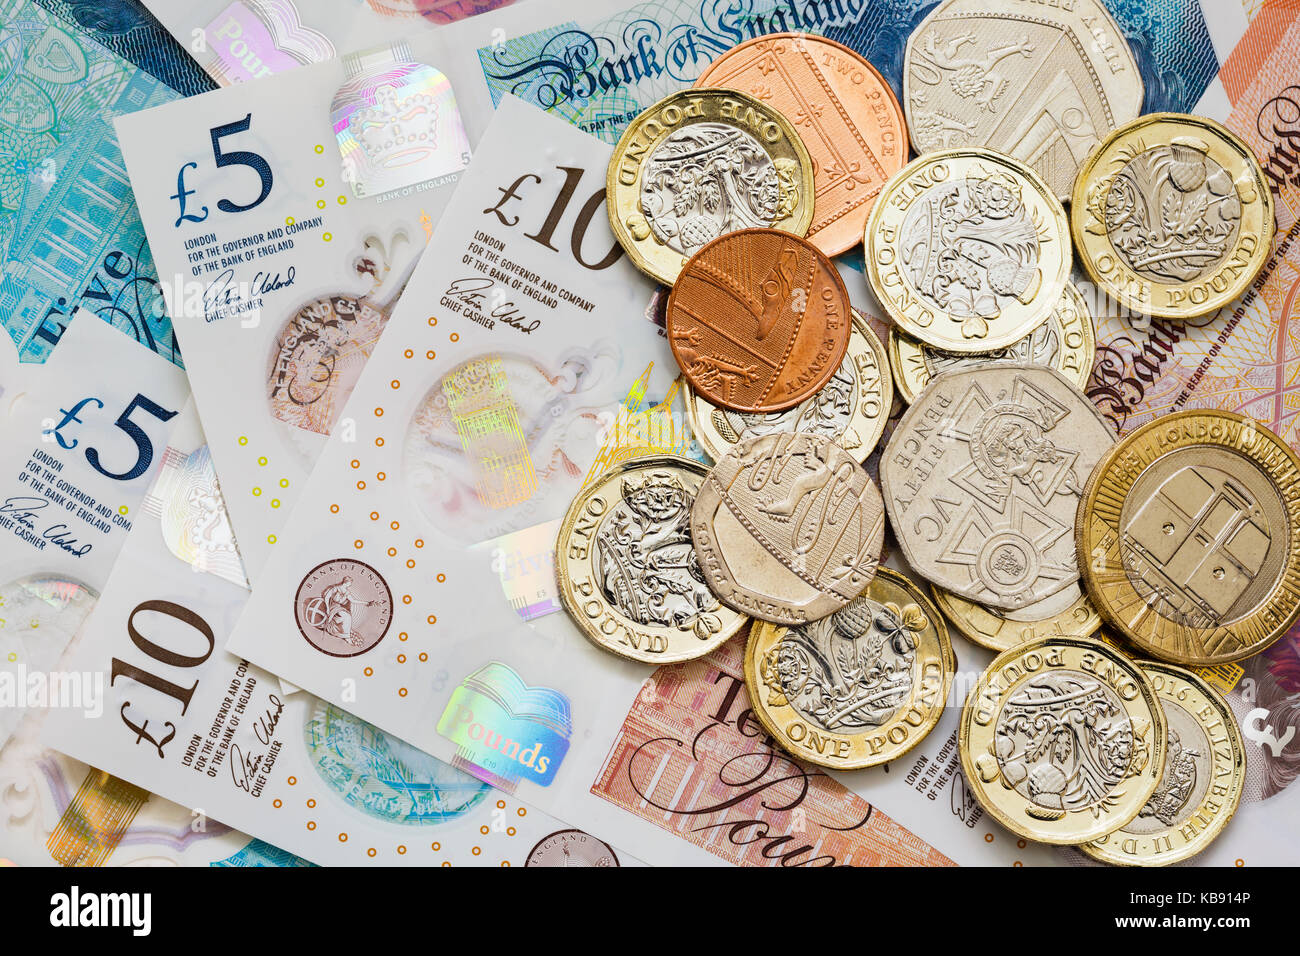 British UK money sterling £10 and £5 notes GBP and a pile of new issue pounds one pound coins cash. Saving money savings concept. England UK Britain Stock Photo